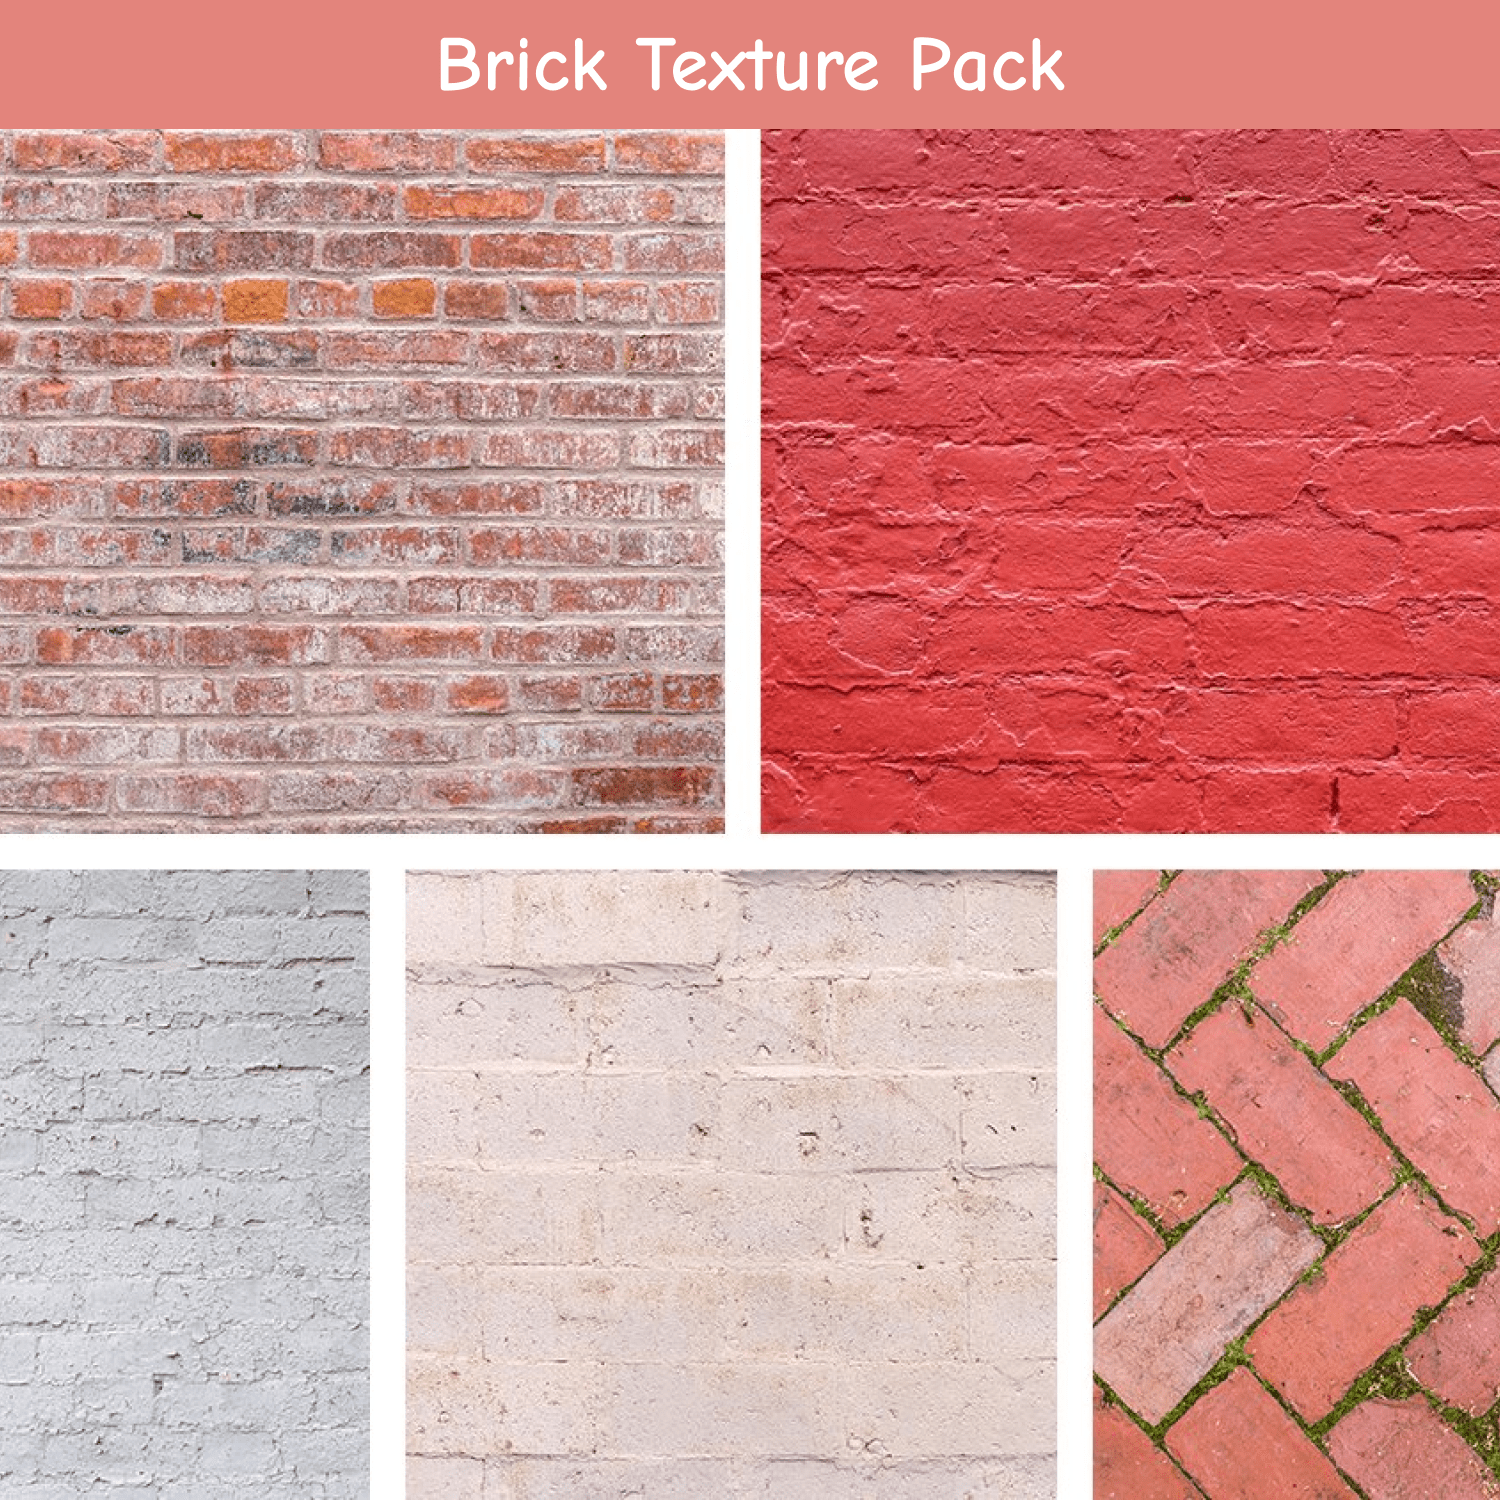 Brick Texture Pack cover.